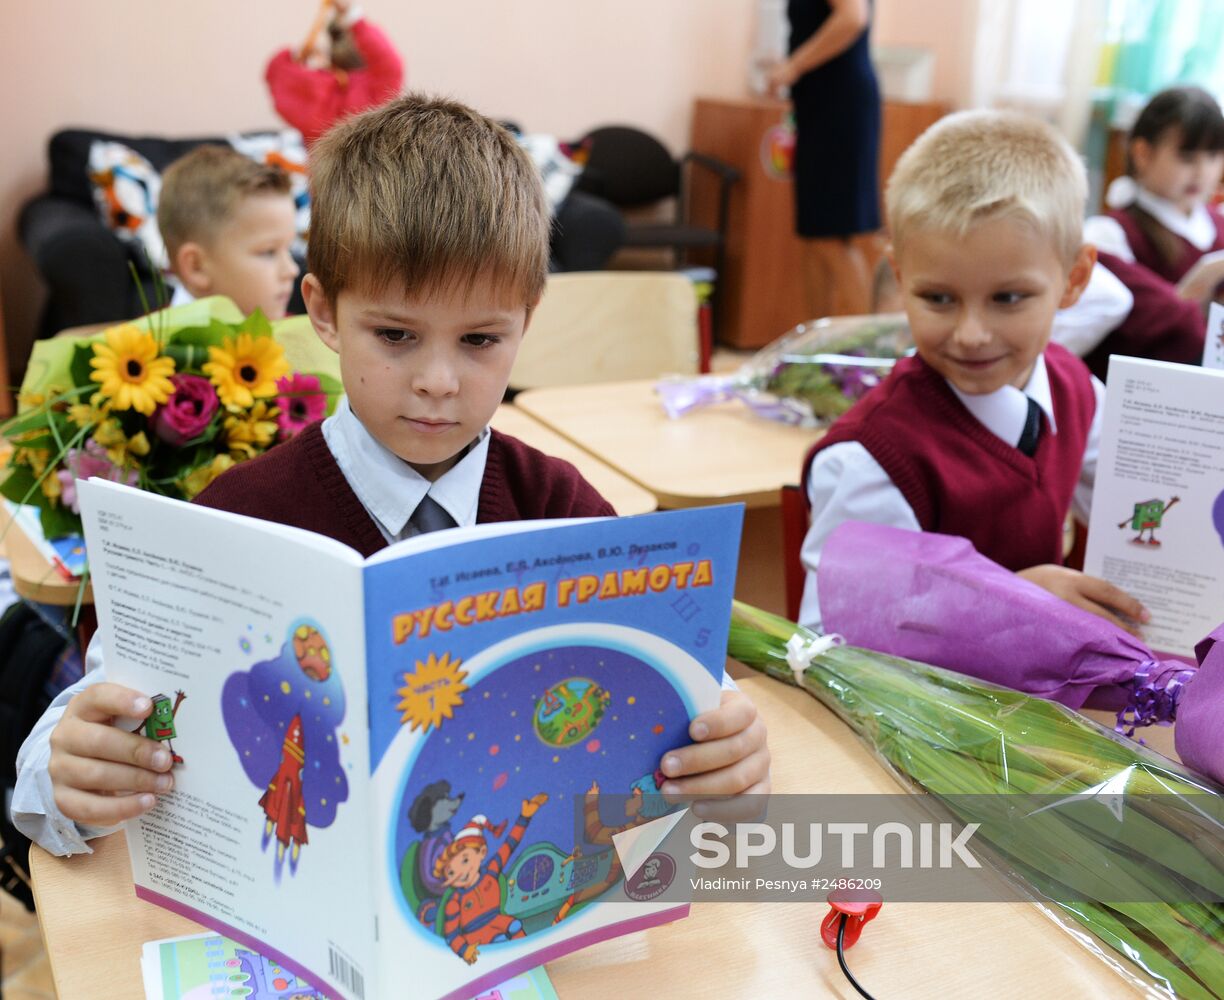 New school year starts in Moscow